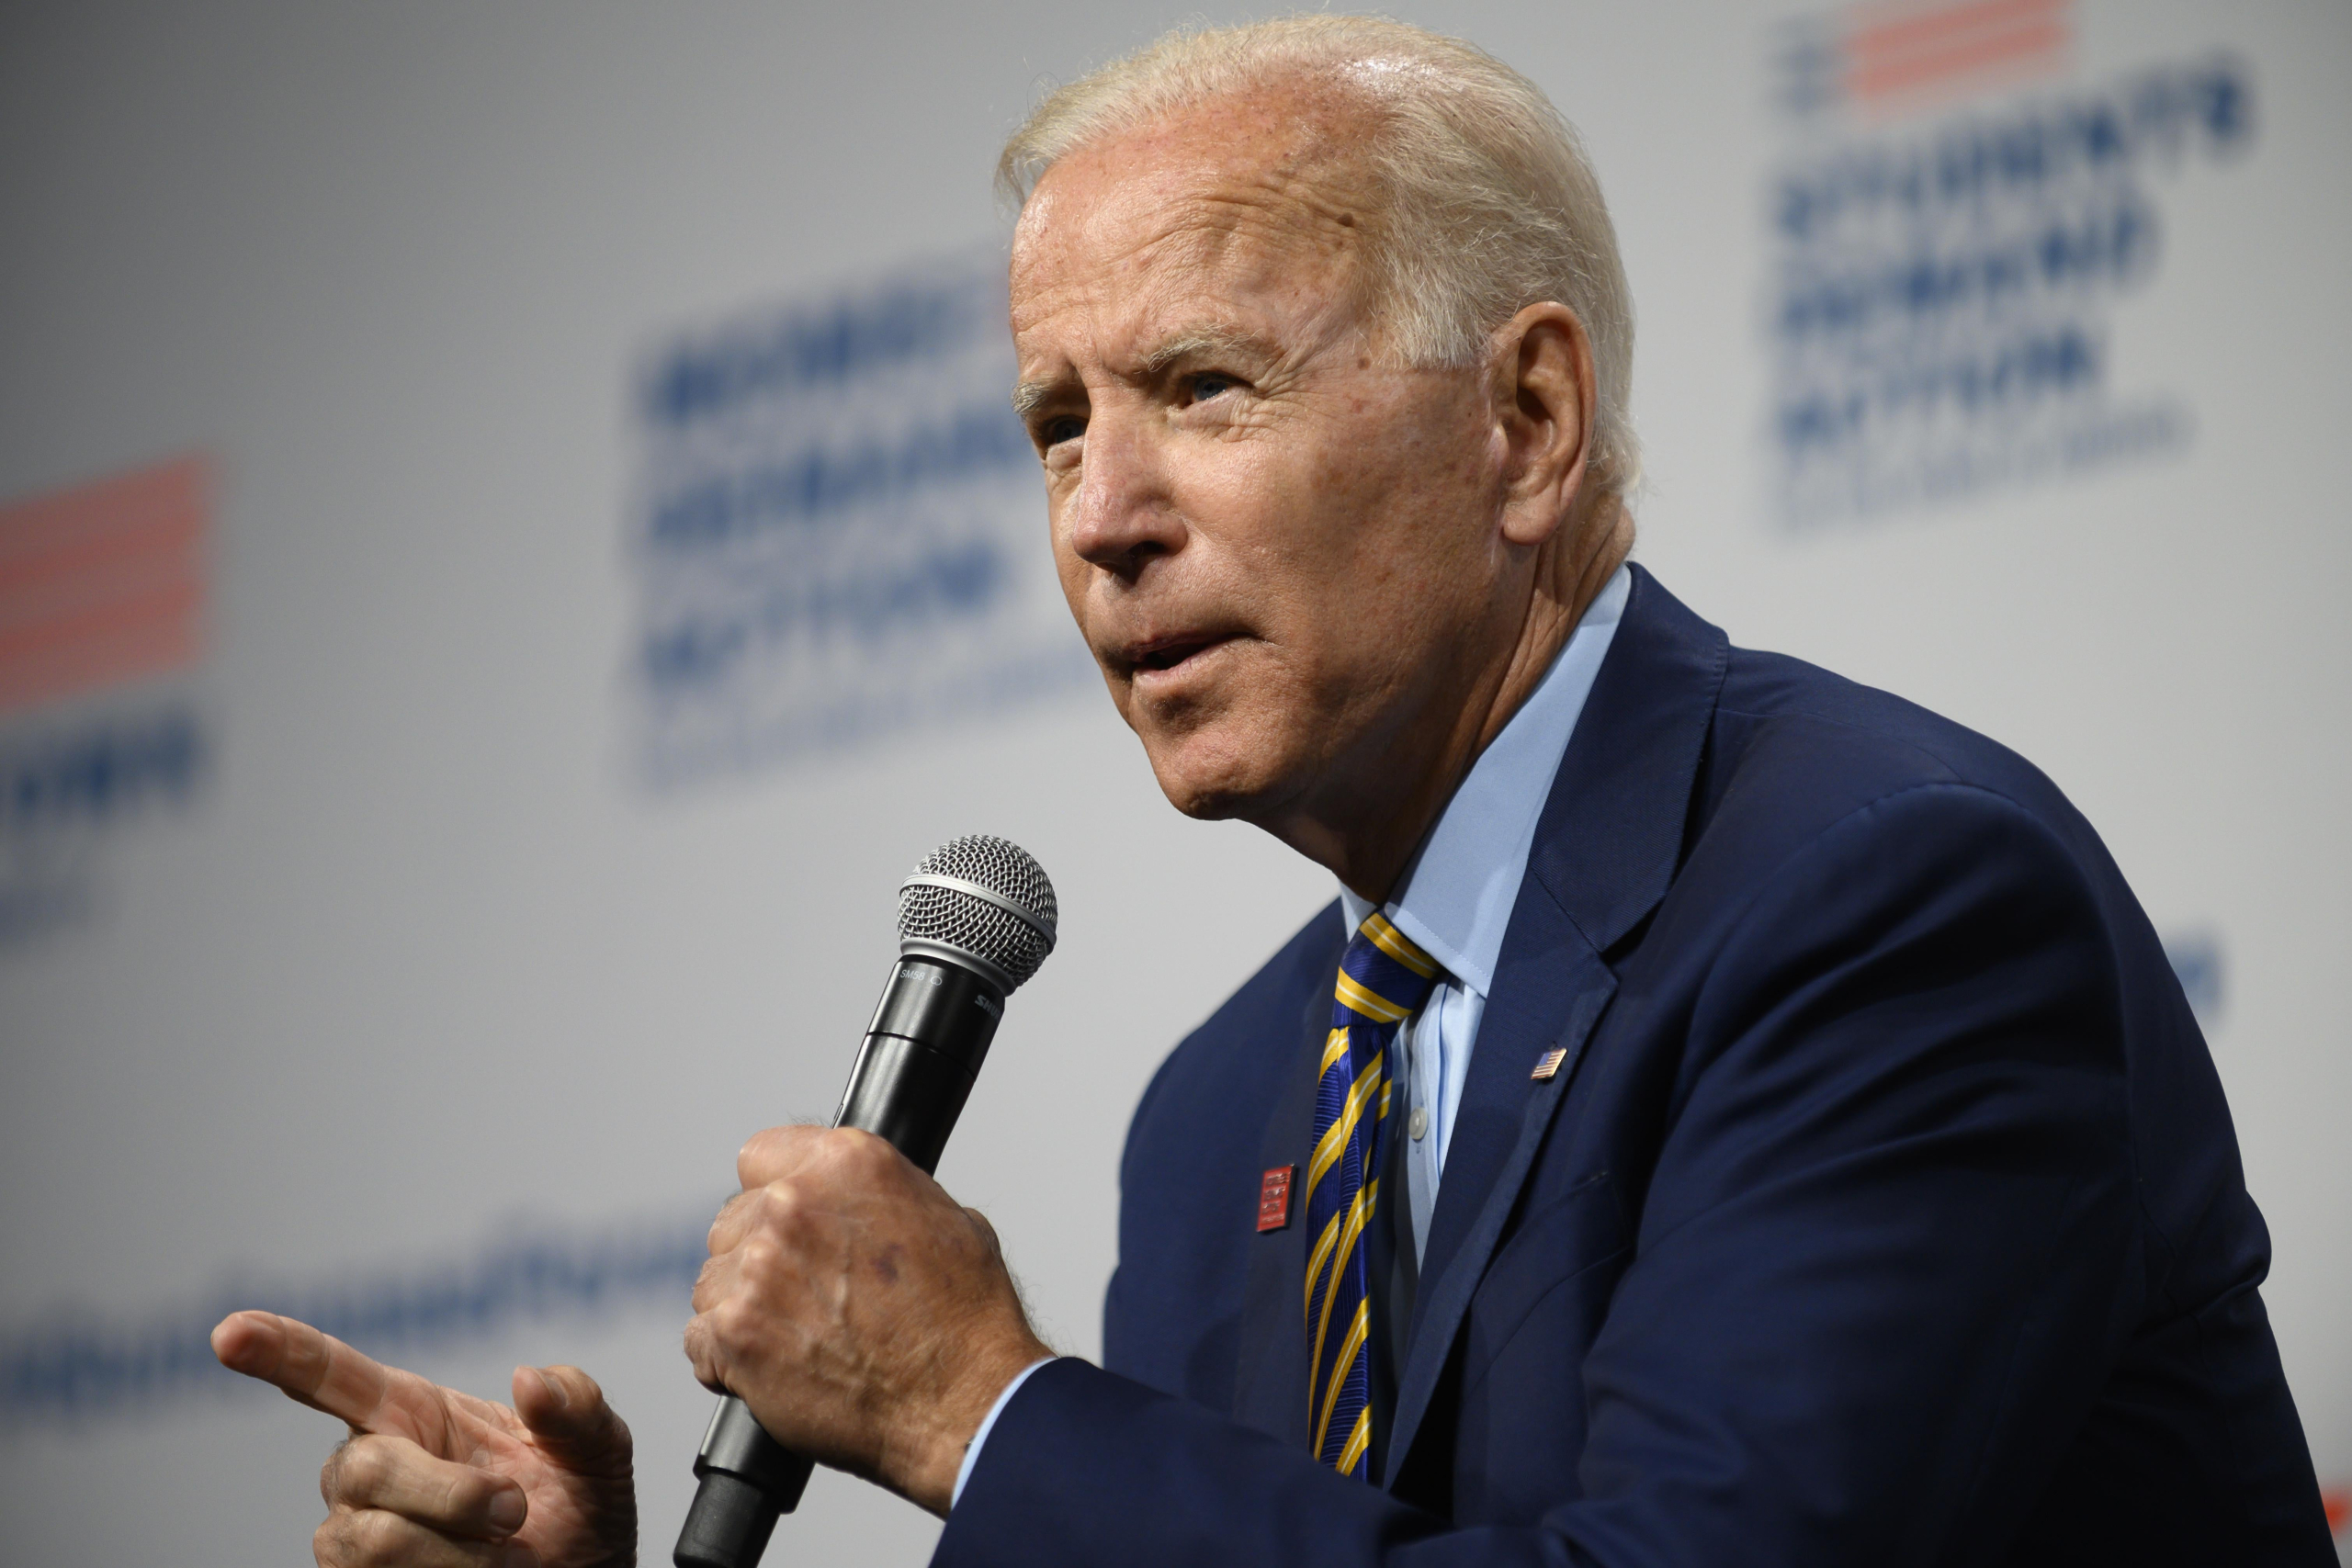 NATIONAL | President Biden Drops Out Of 2024 Race Against Trump